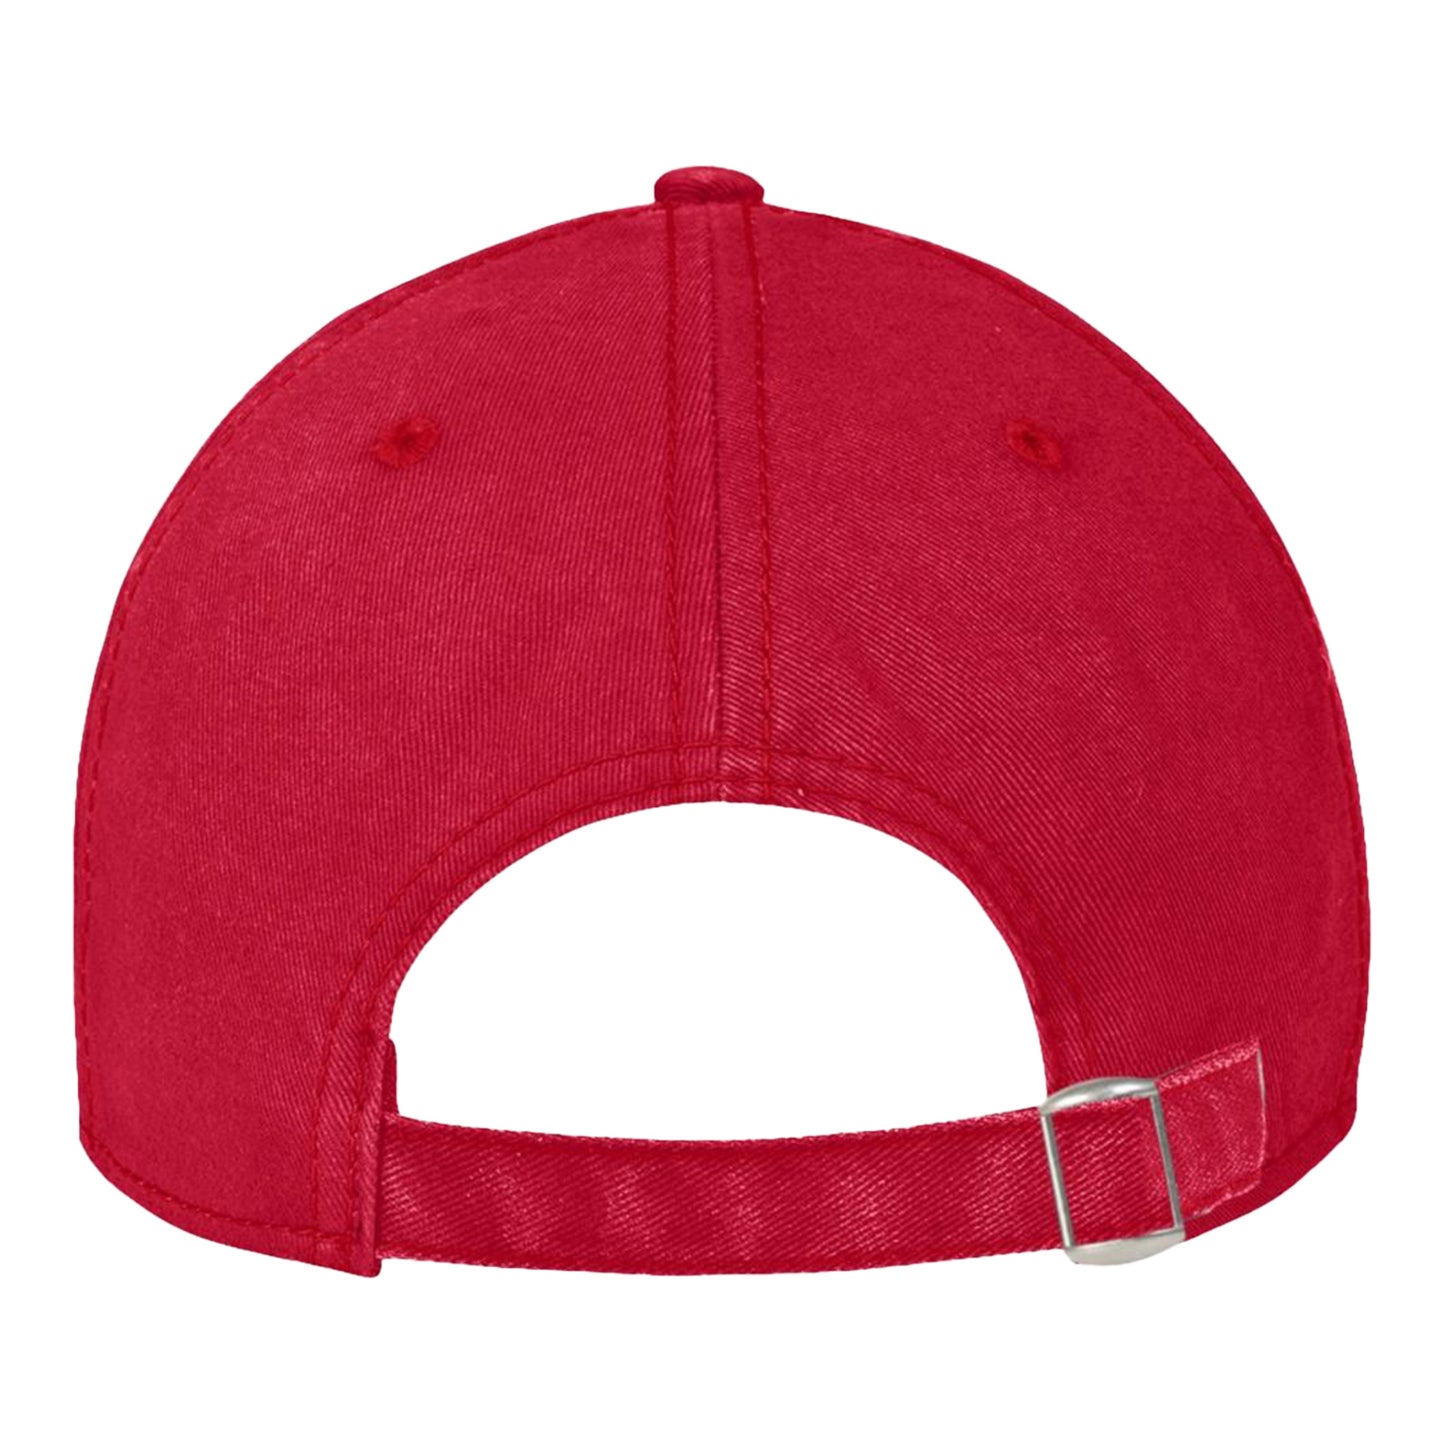 Under Armour Houston Roughnecks Garment Washed Hat In Red - Back View